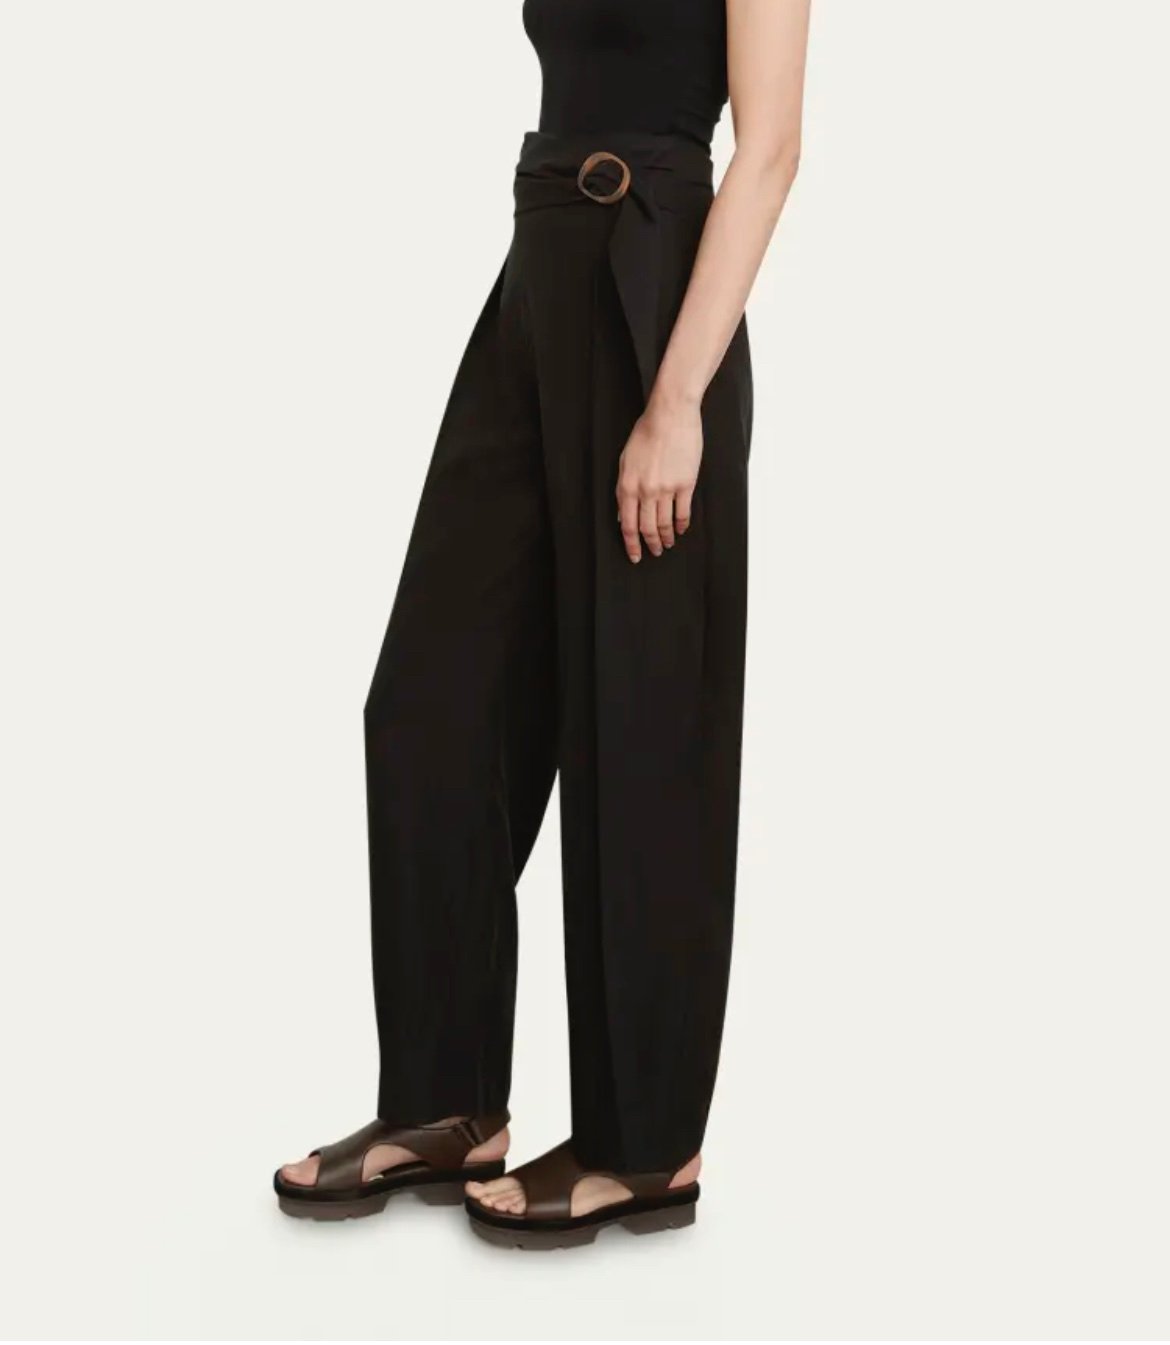 the Lowest price Vince tie front wide leg pants OSJ2fIg